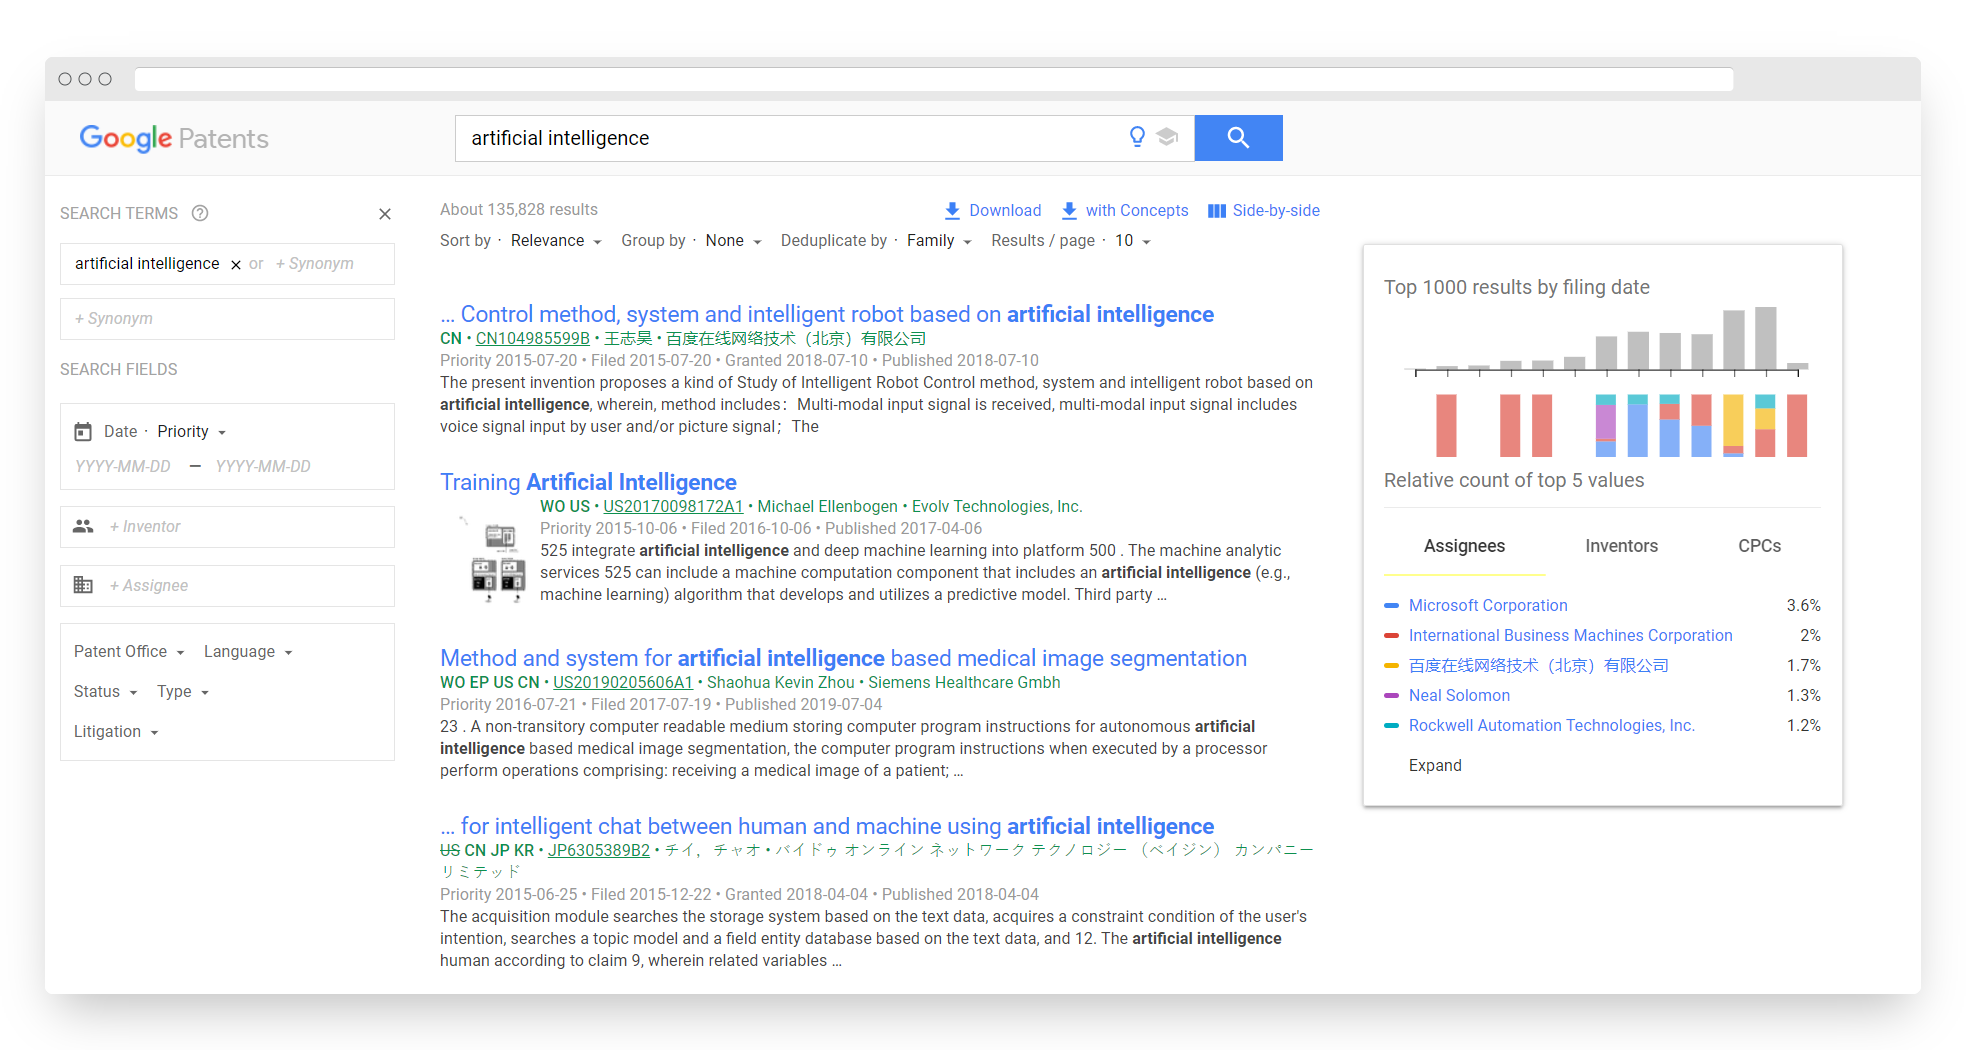 The Google Patent Search